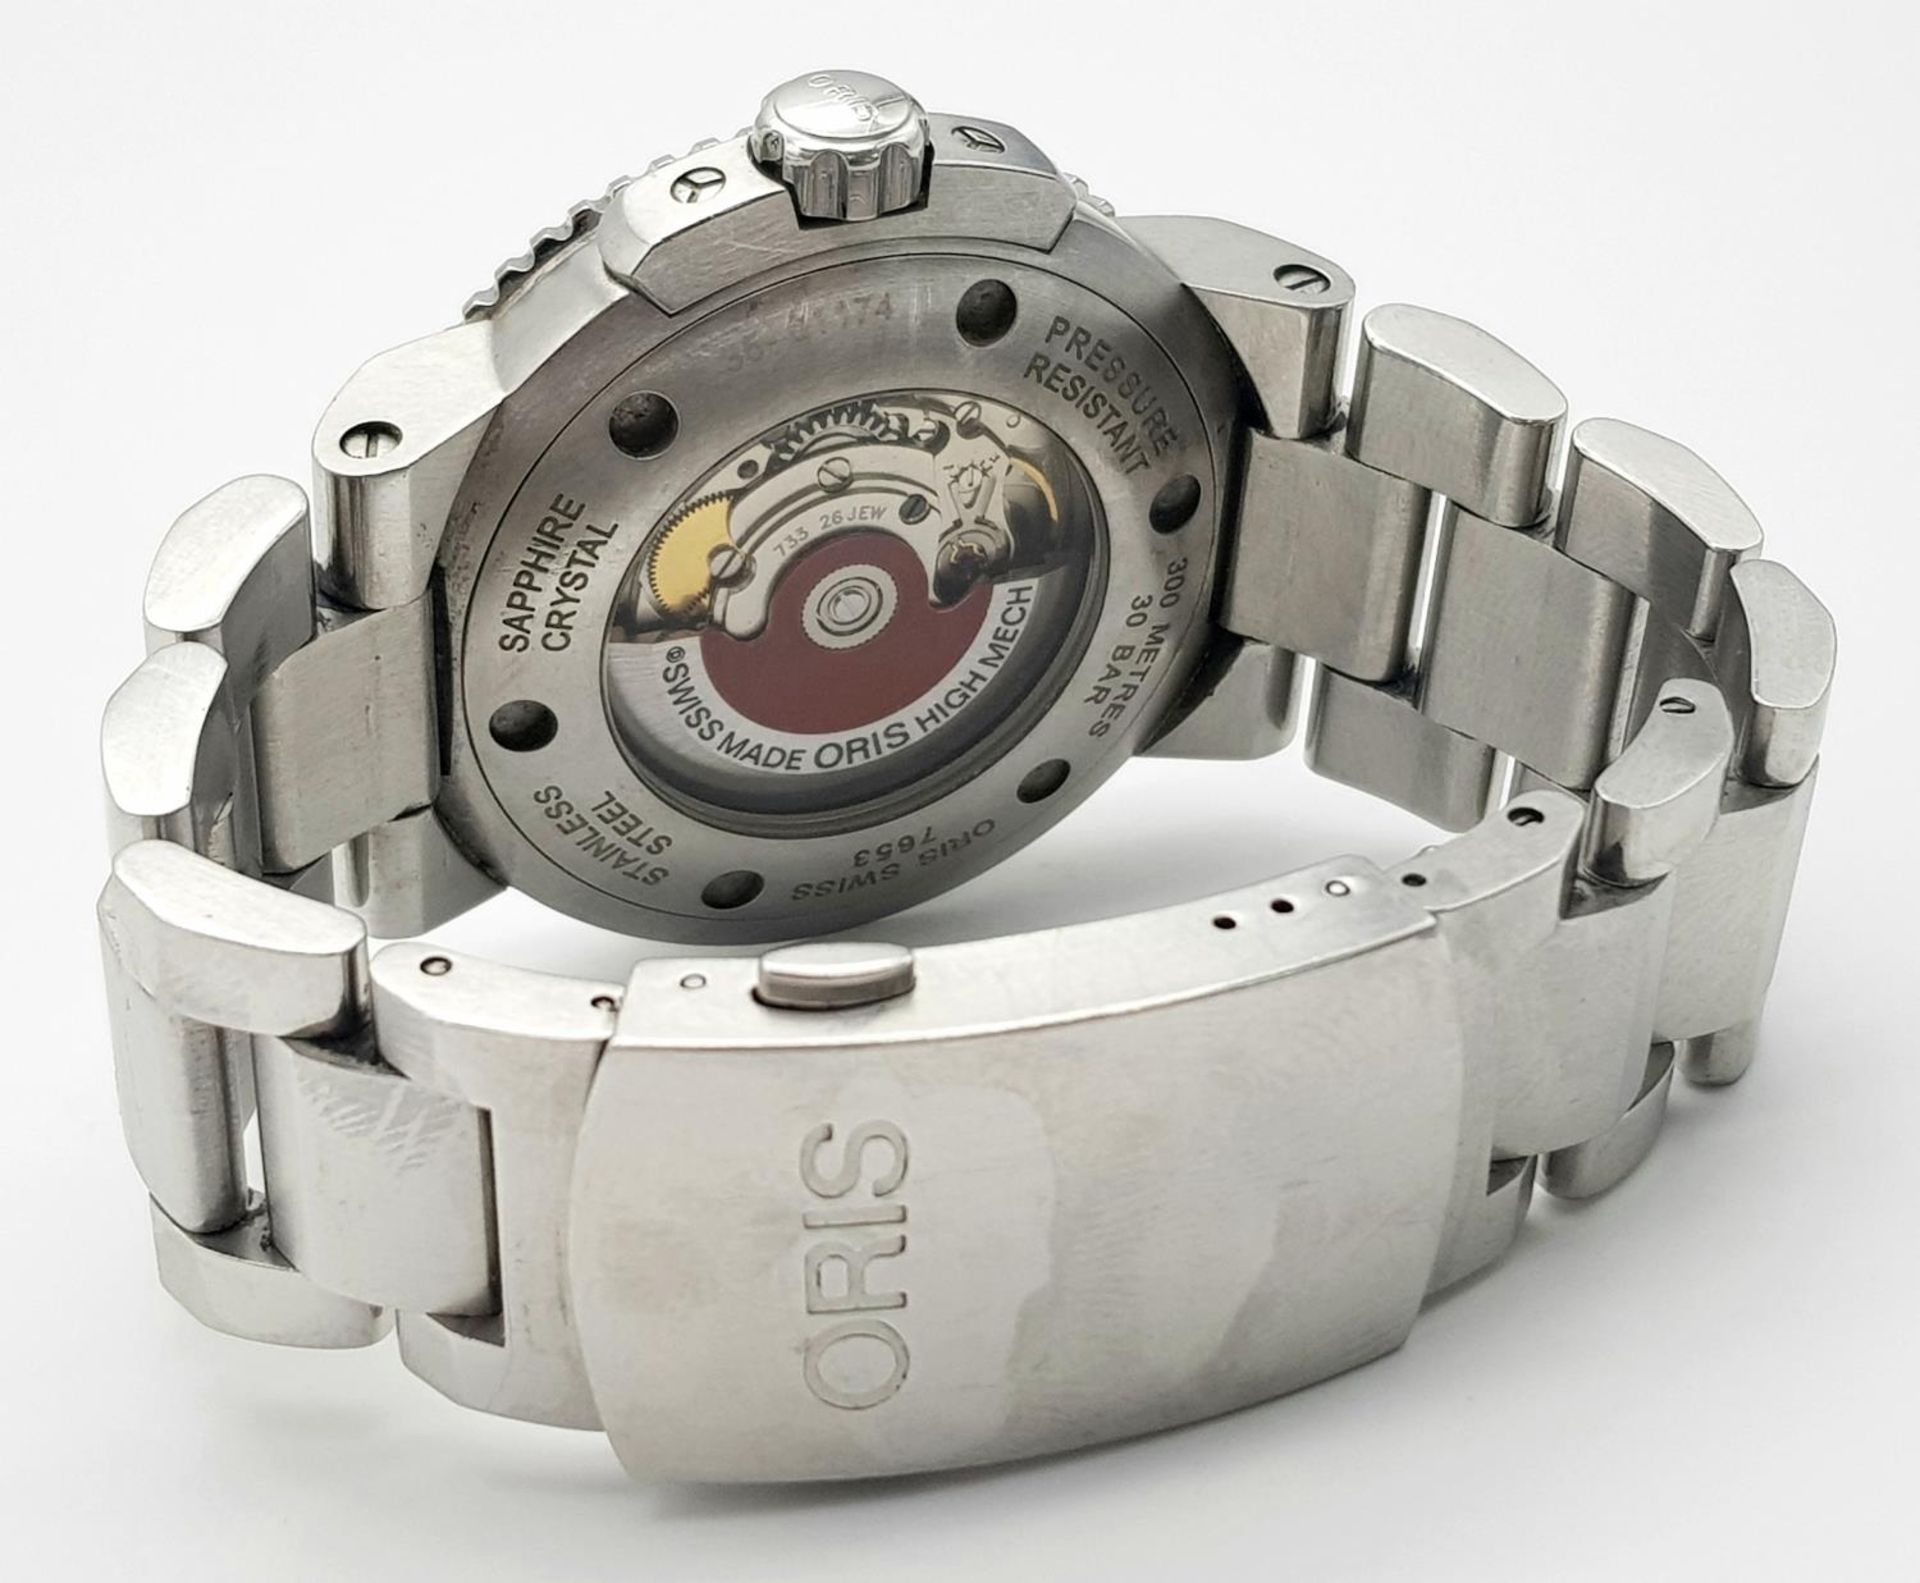 An Oris Automatic Divers Watch. Pressure resistant to 300M - Model 7653. Stainless steel bracelet - Image 8 of 8